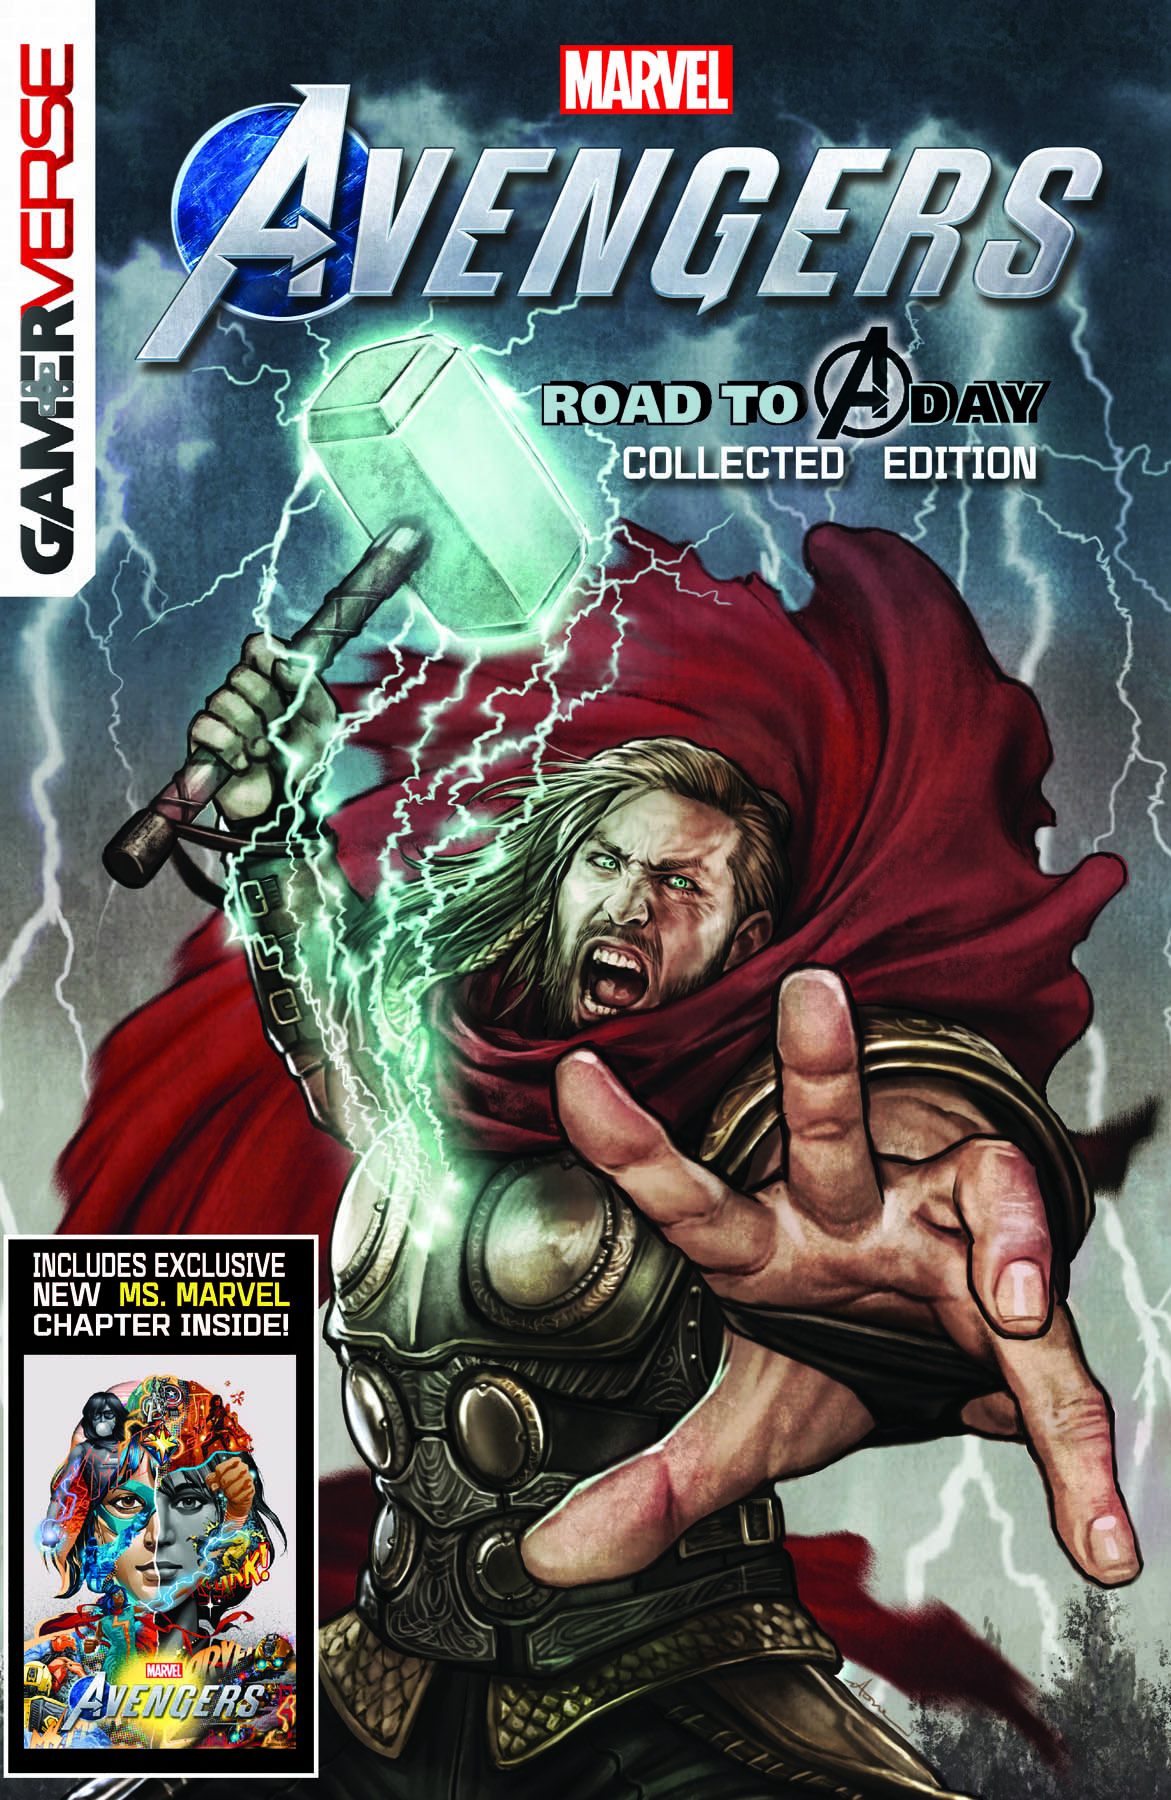 MARVEL'S AVENGERS: ROAD TO A-DAY DIGITAL COLLECTION (Trade Paperback)